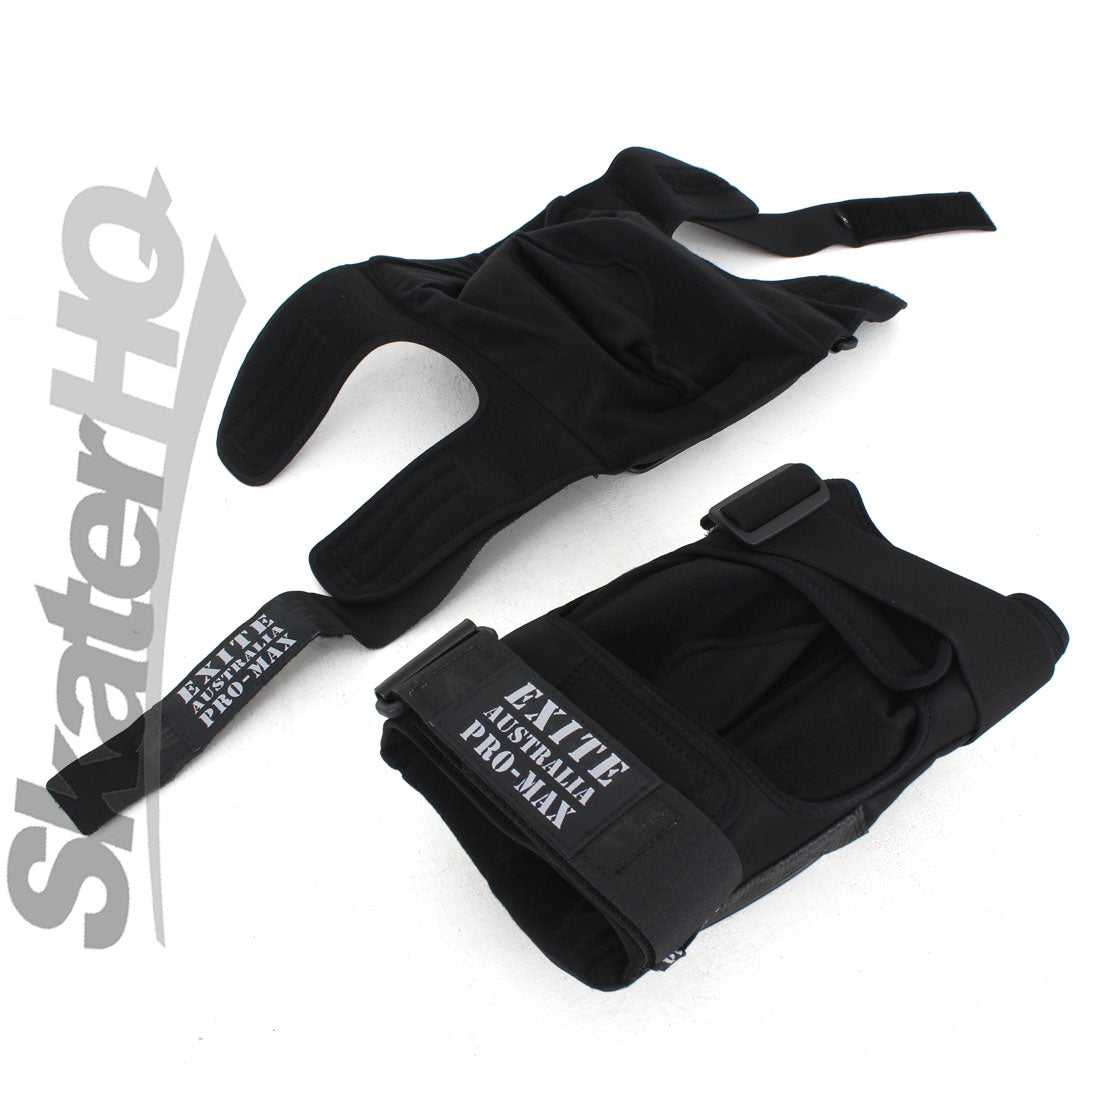 Exite Pro Max Modular Knee Pads - Small Protective Gear